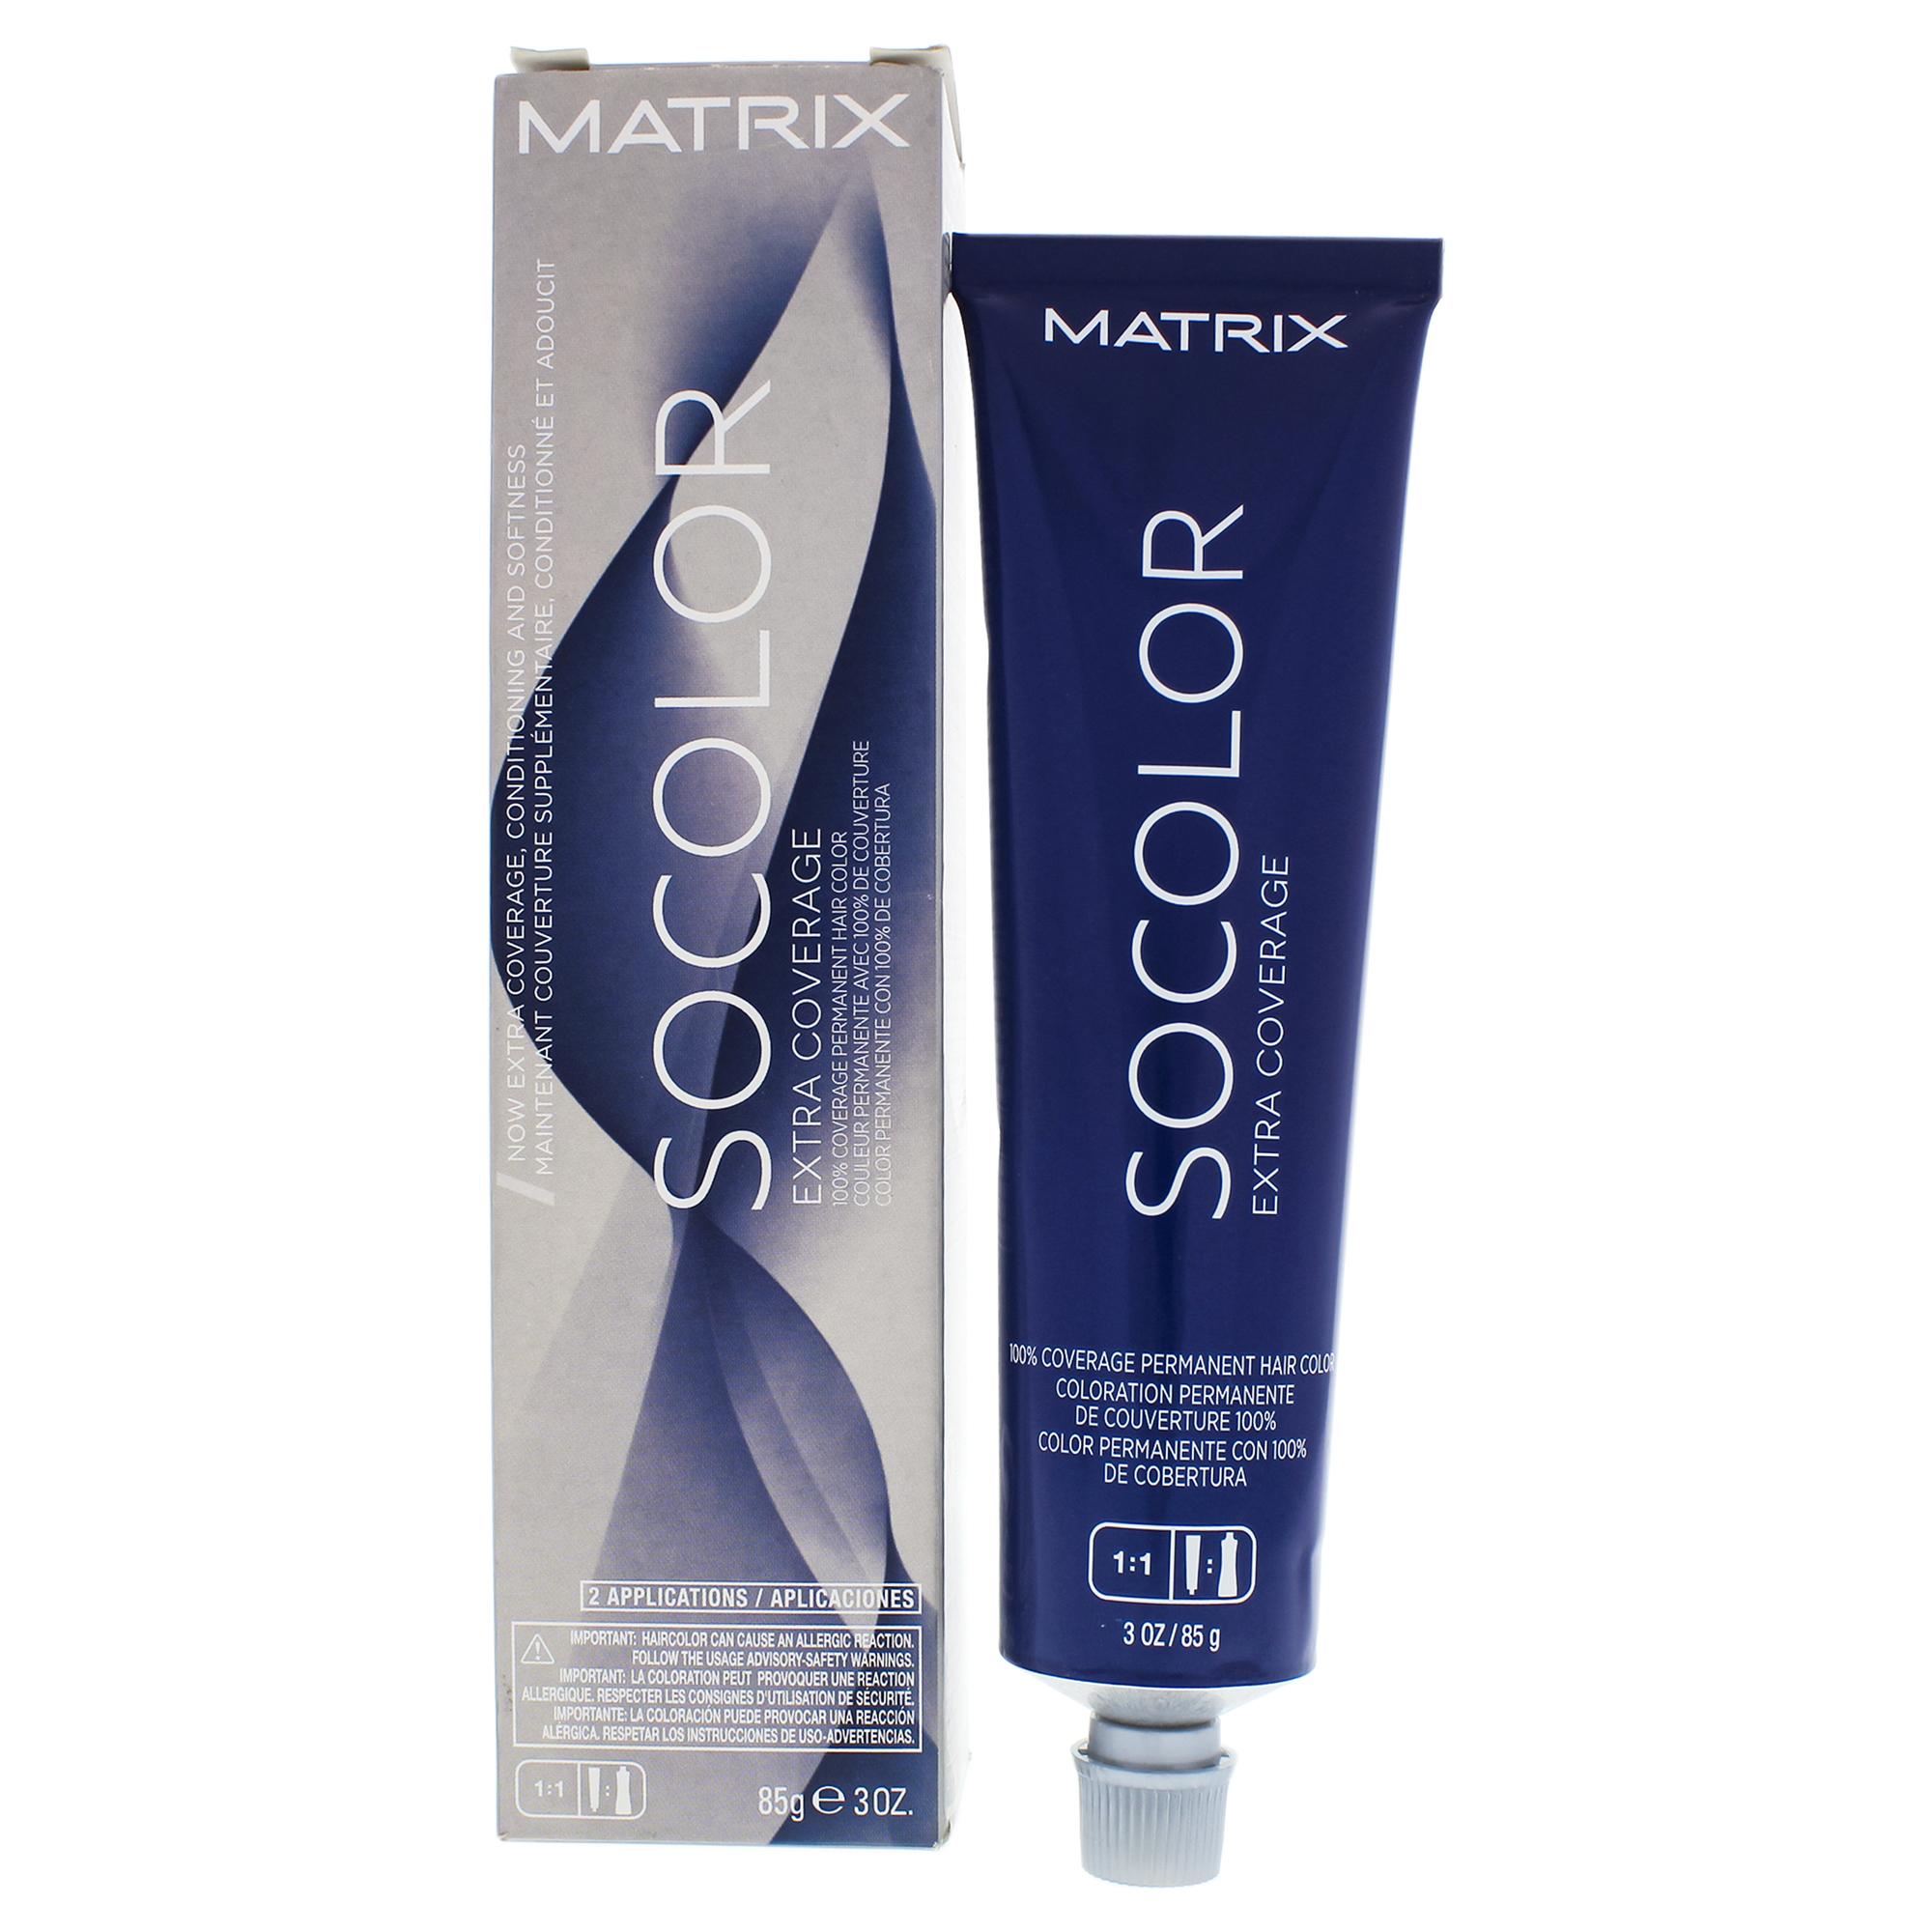 Matrix Socolor Extra Coverage Hair Color 506N - Light Brown Neutral Extra Coverage by Matrix for Unisex - 3 oz Hair Color - image 2 of 2